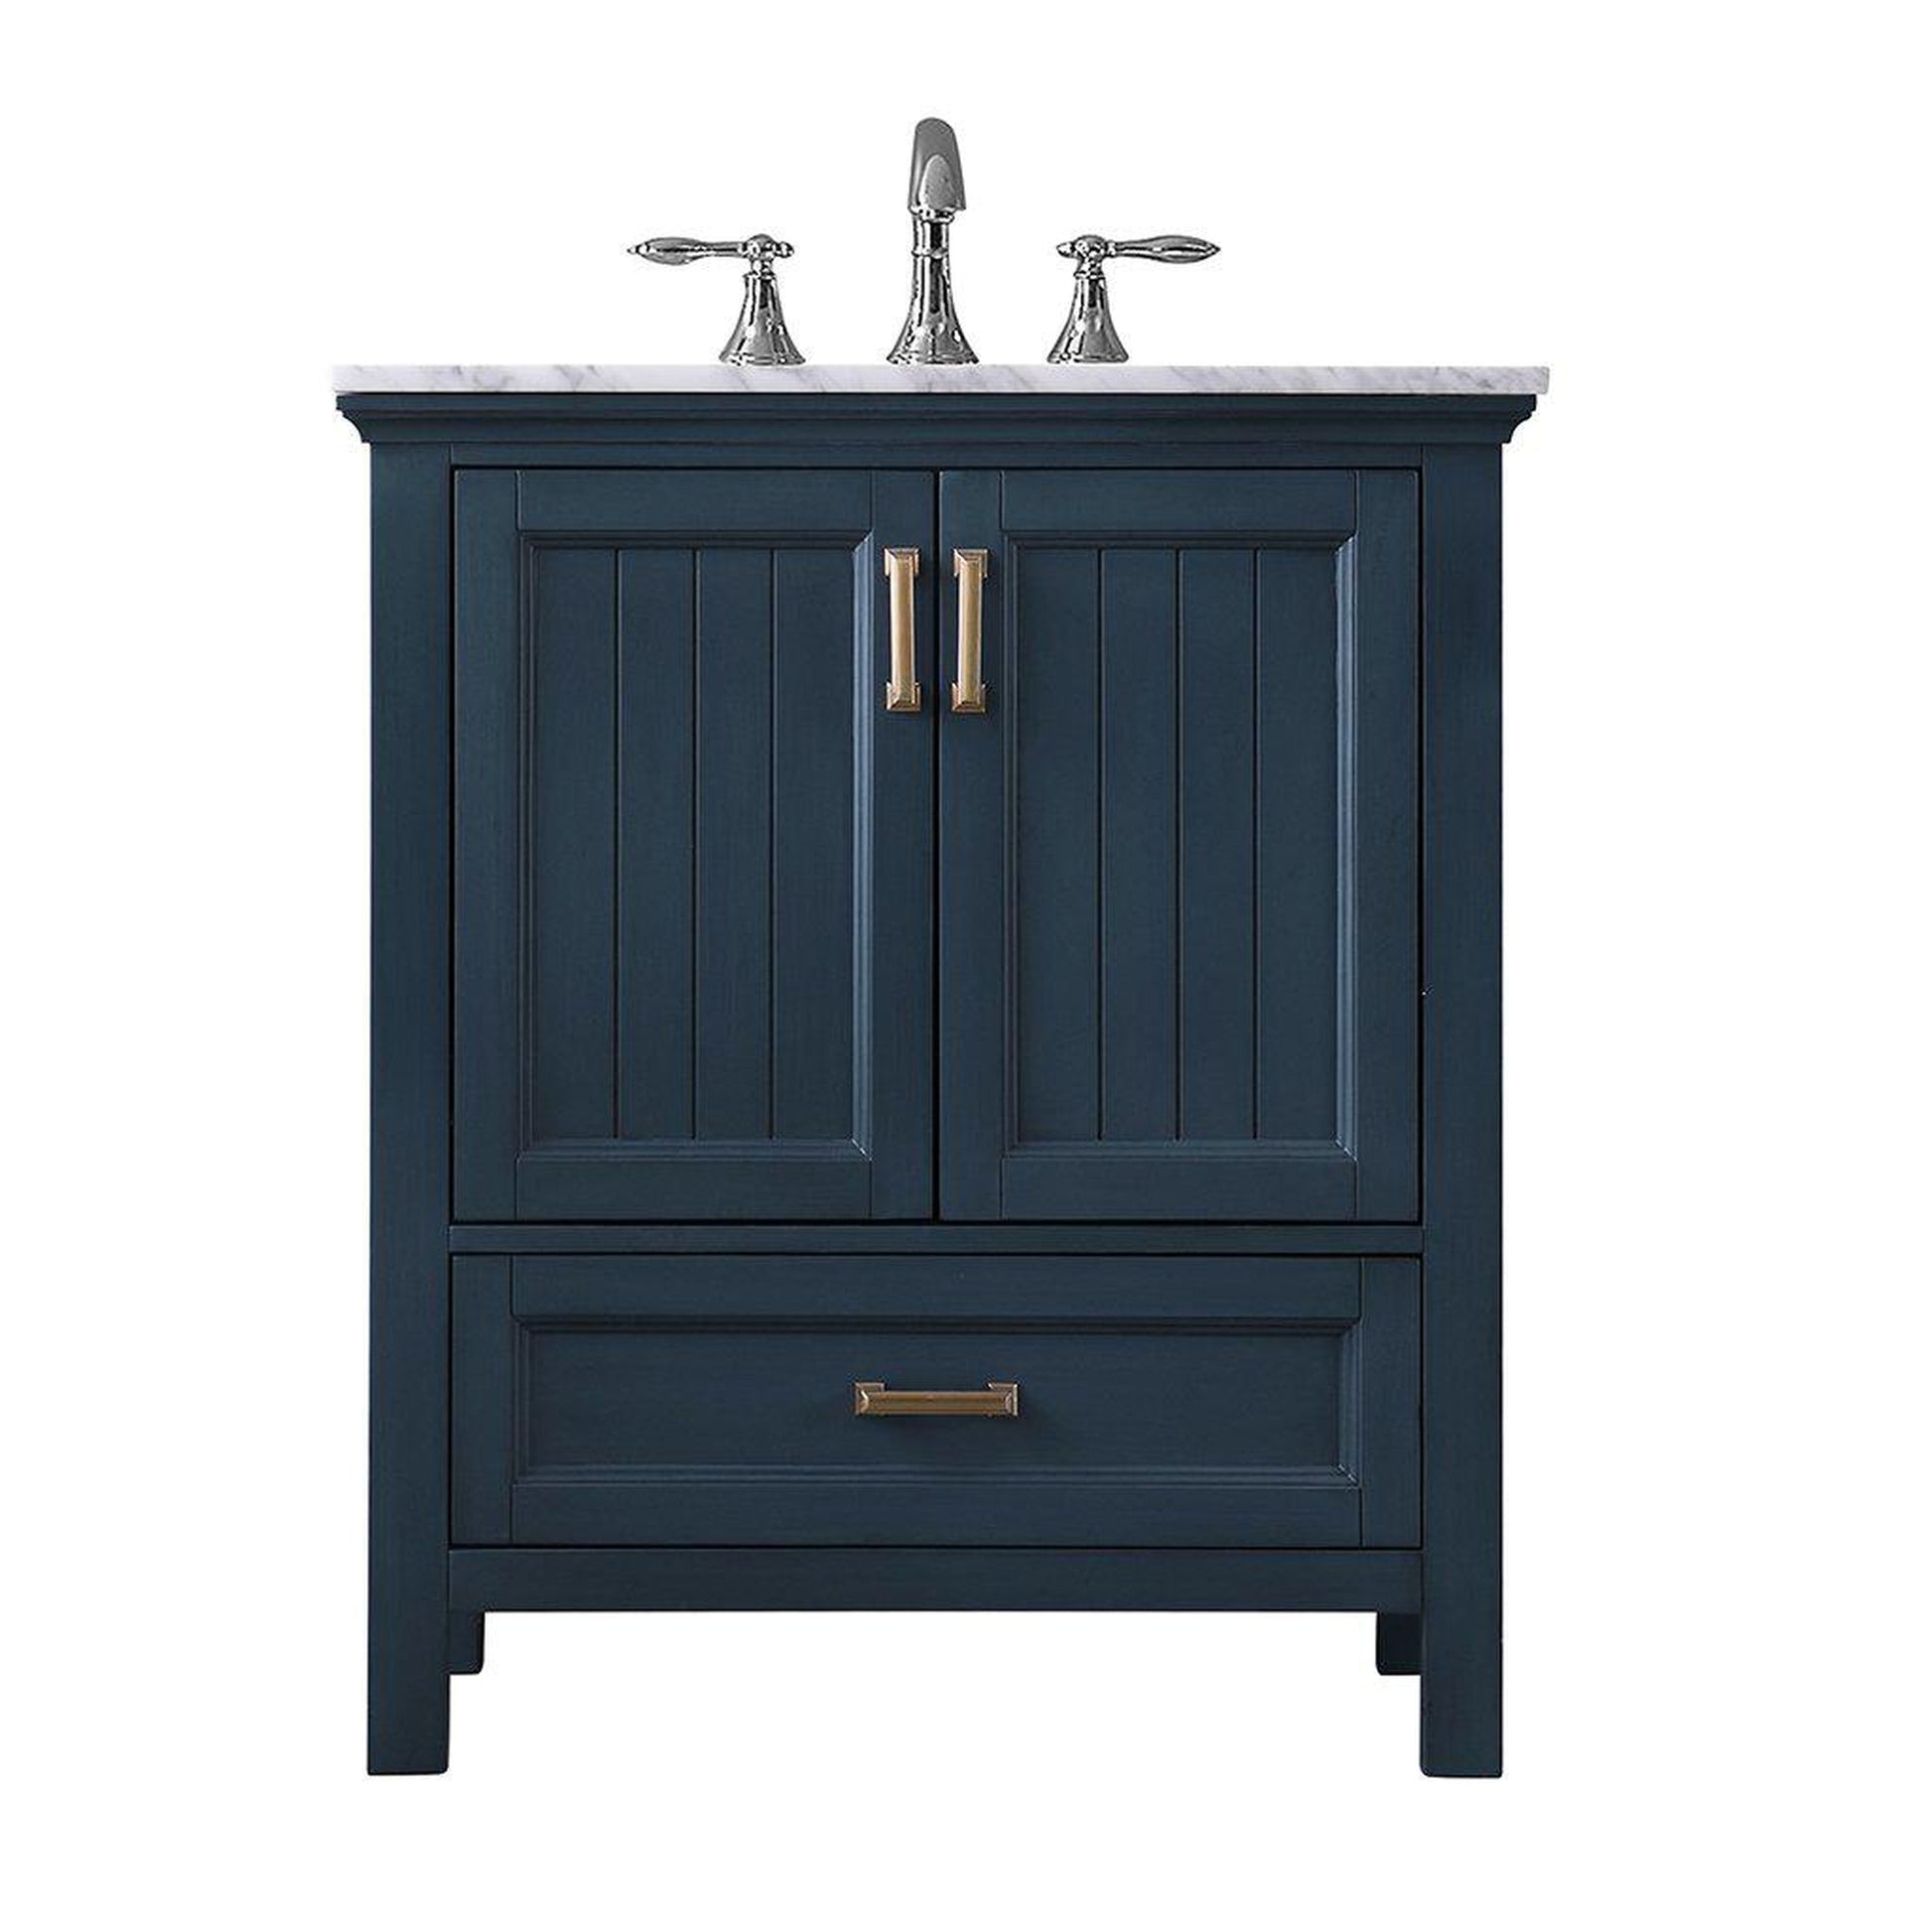 Altair Isla 30" Single Classic Blue Freestanding Bathroom Vanity Set With Natural Carrara White Marble Top, Rectangular Undermount Ceramic Sink, and Overflow